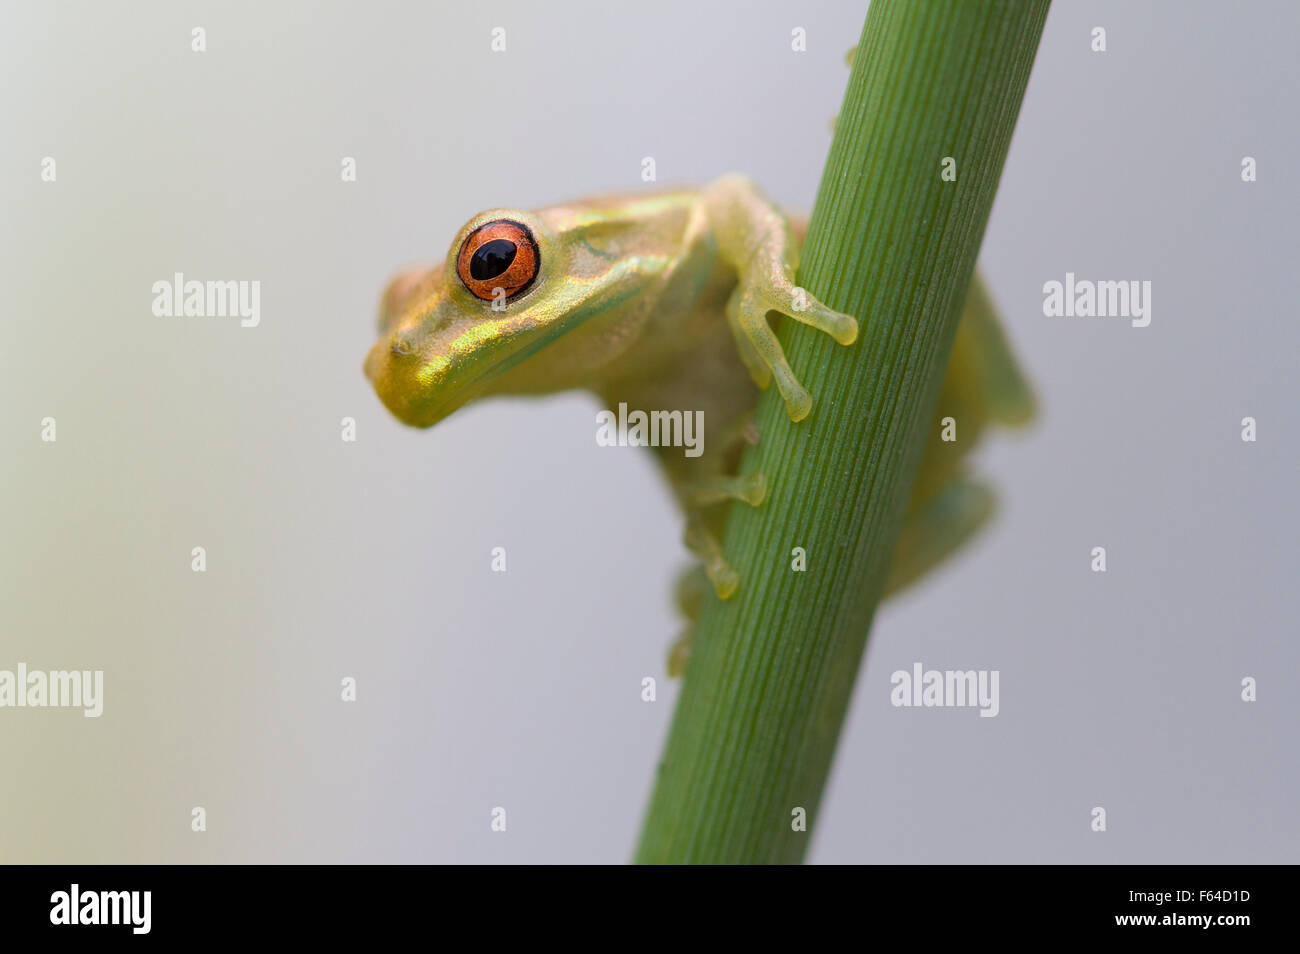 Cuban Treefrog (Osteopilus septentrionalis) Fort Myers, Florida, USA. Introduced species. Stock Photo